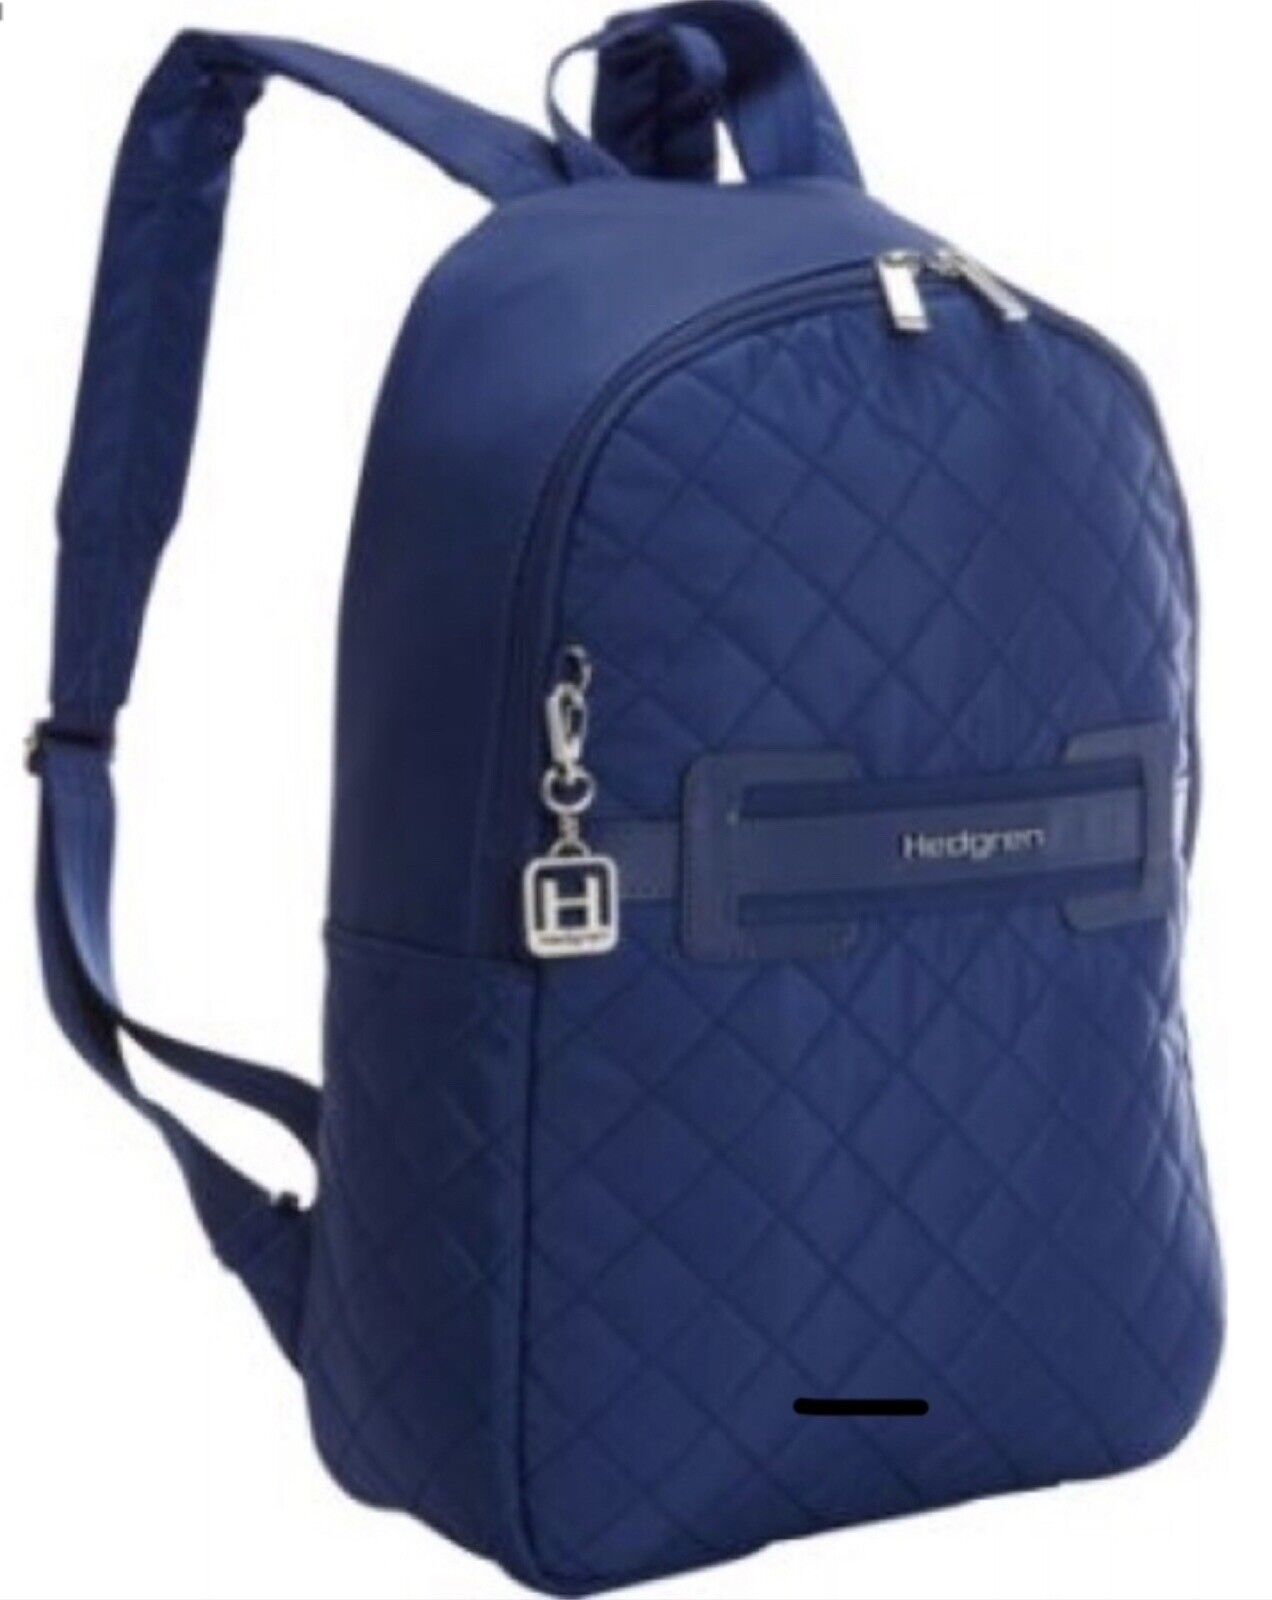 HEDGREN BLUE BARBARA ESTATE BACKPACK QUILTED BUSINESS LAPTOP DIAMOND TOUCH NEW